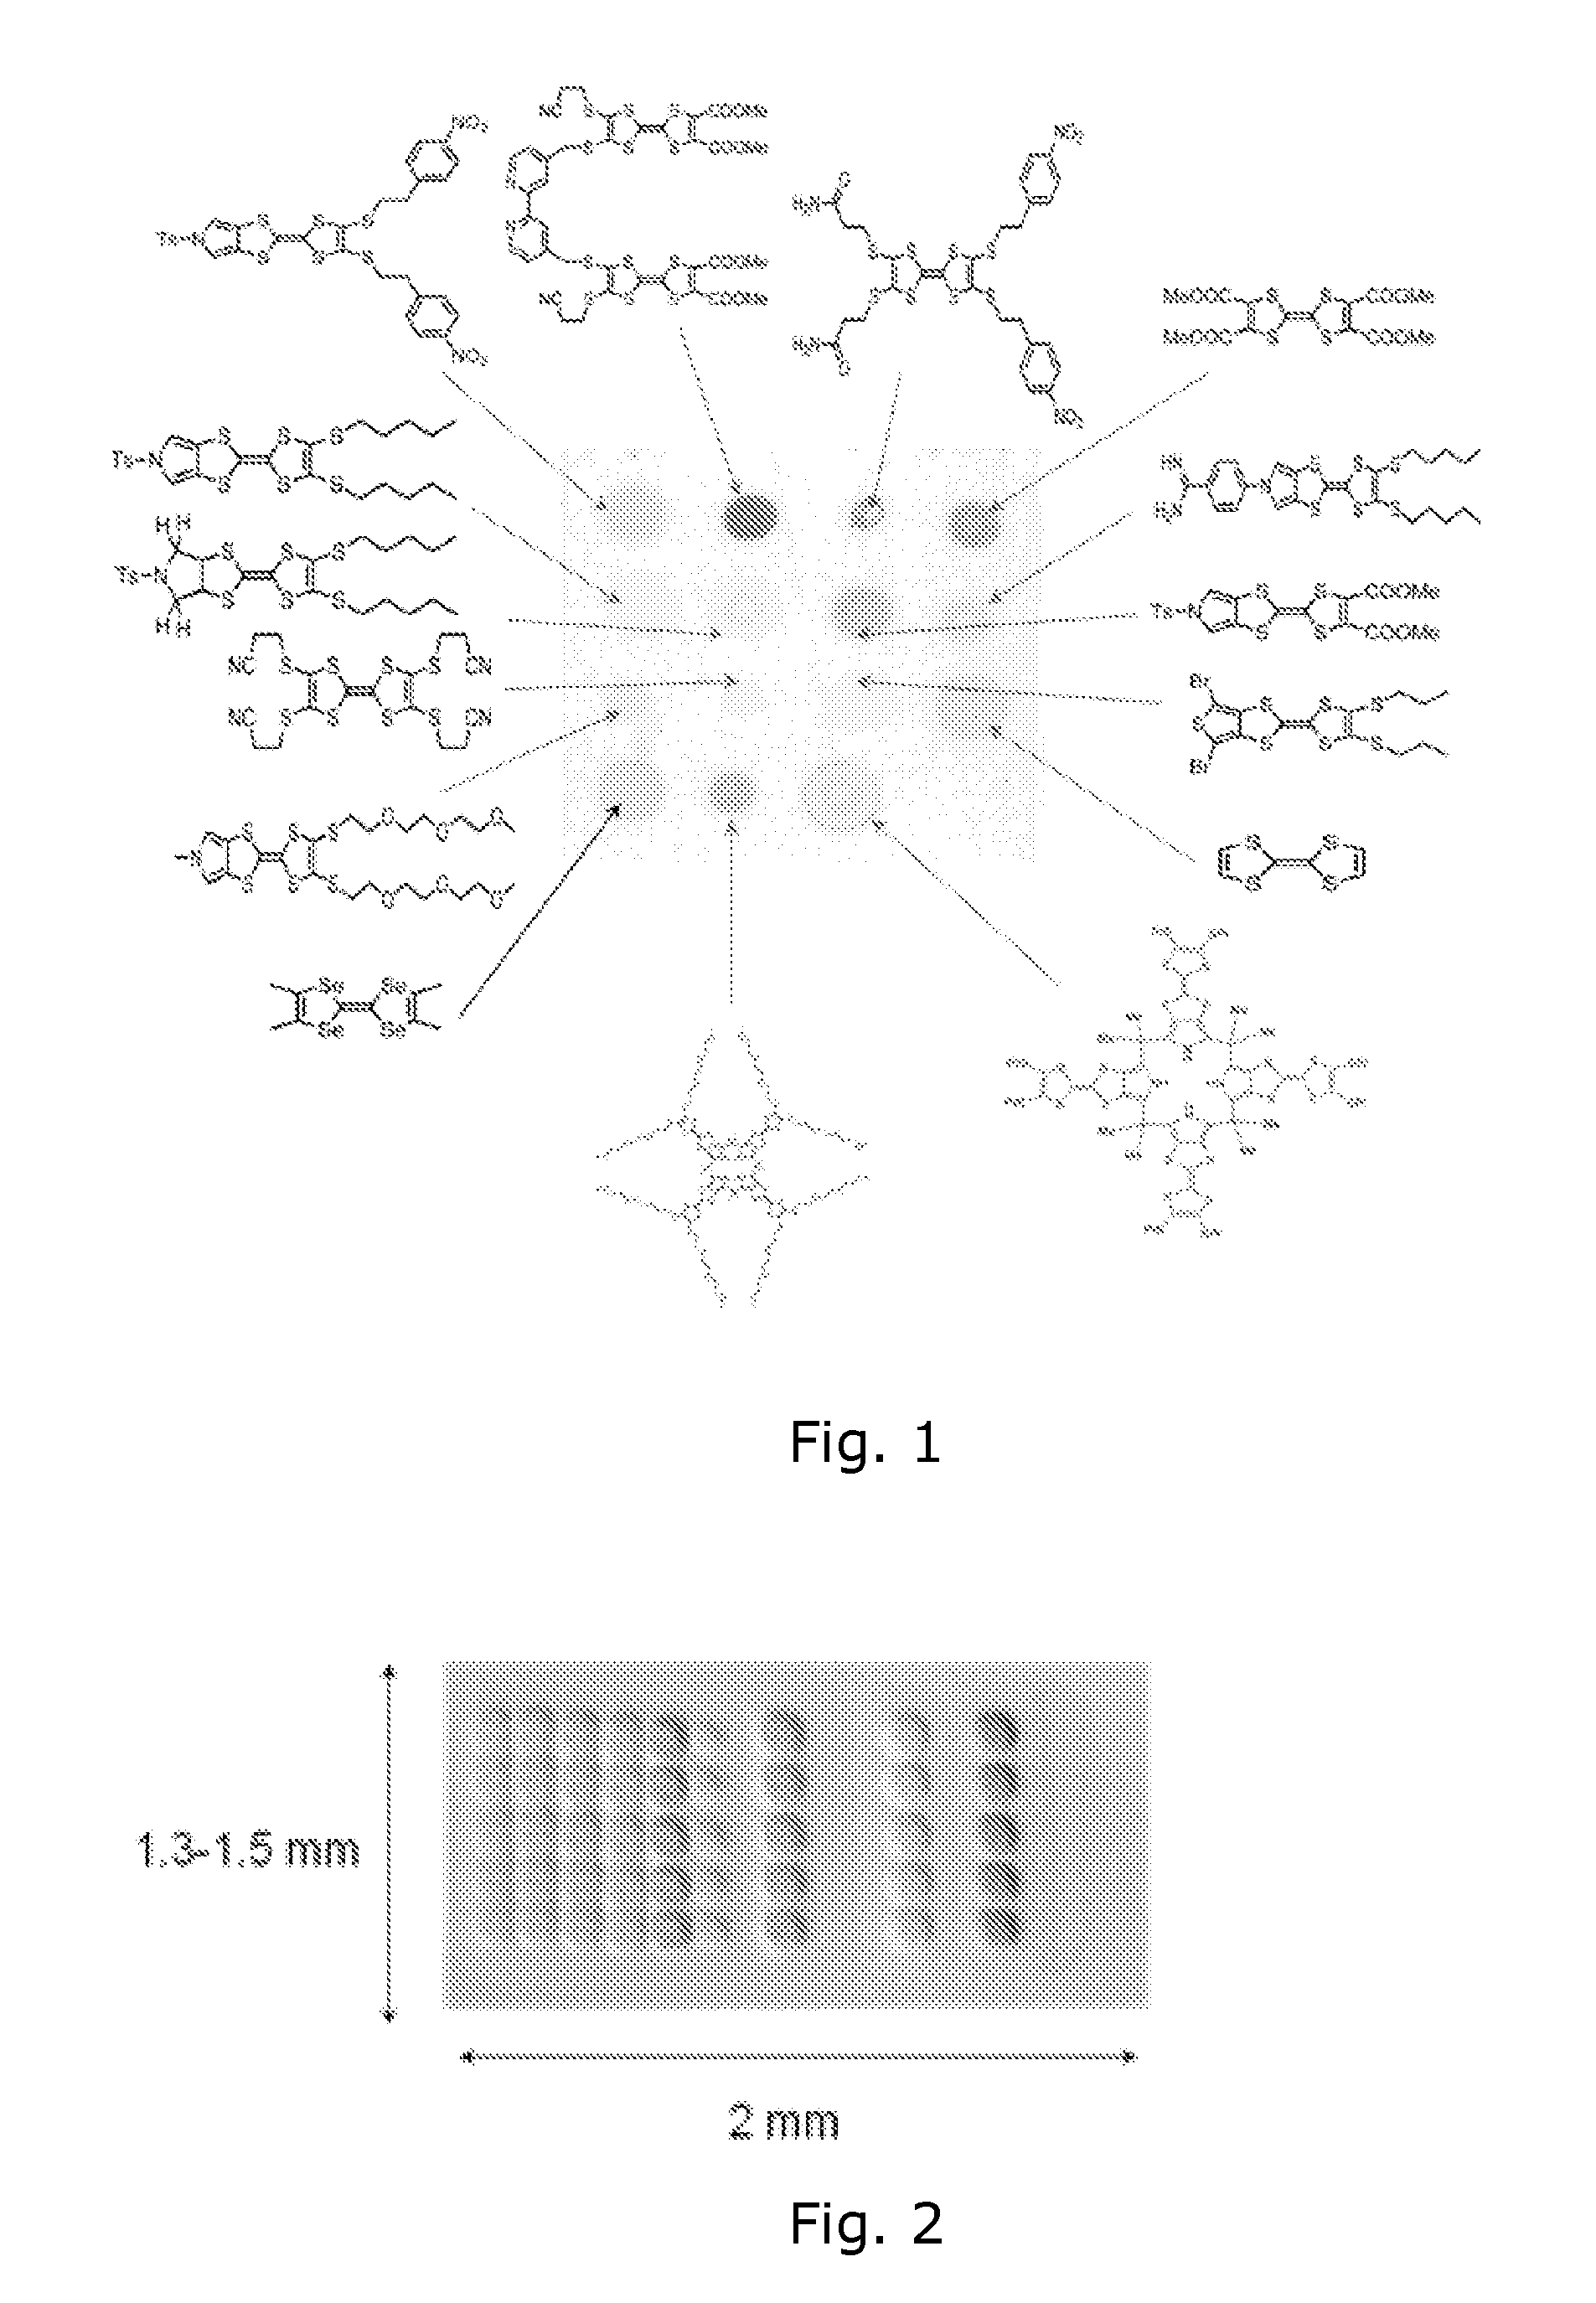 Multisensor array for detection of analytes or mixtures thereof in gas or liquid phase